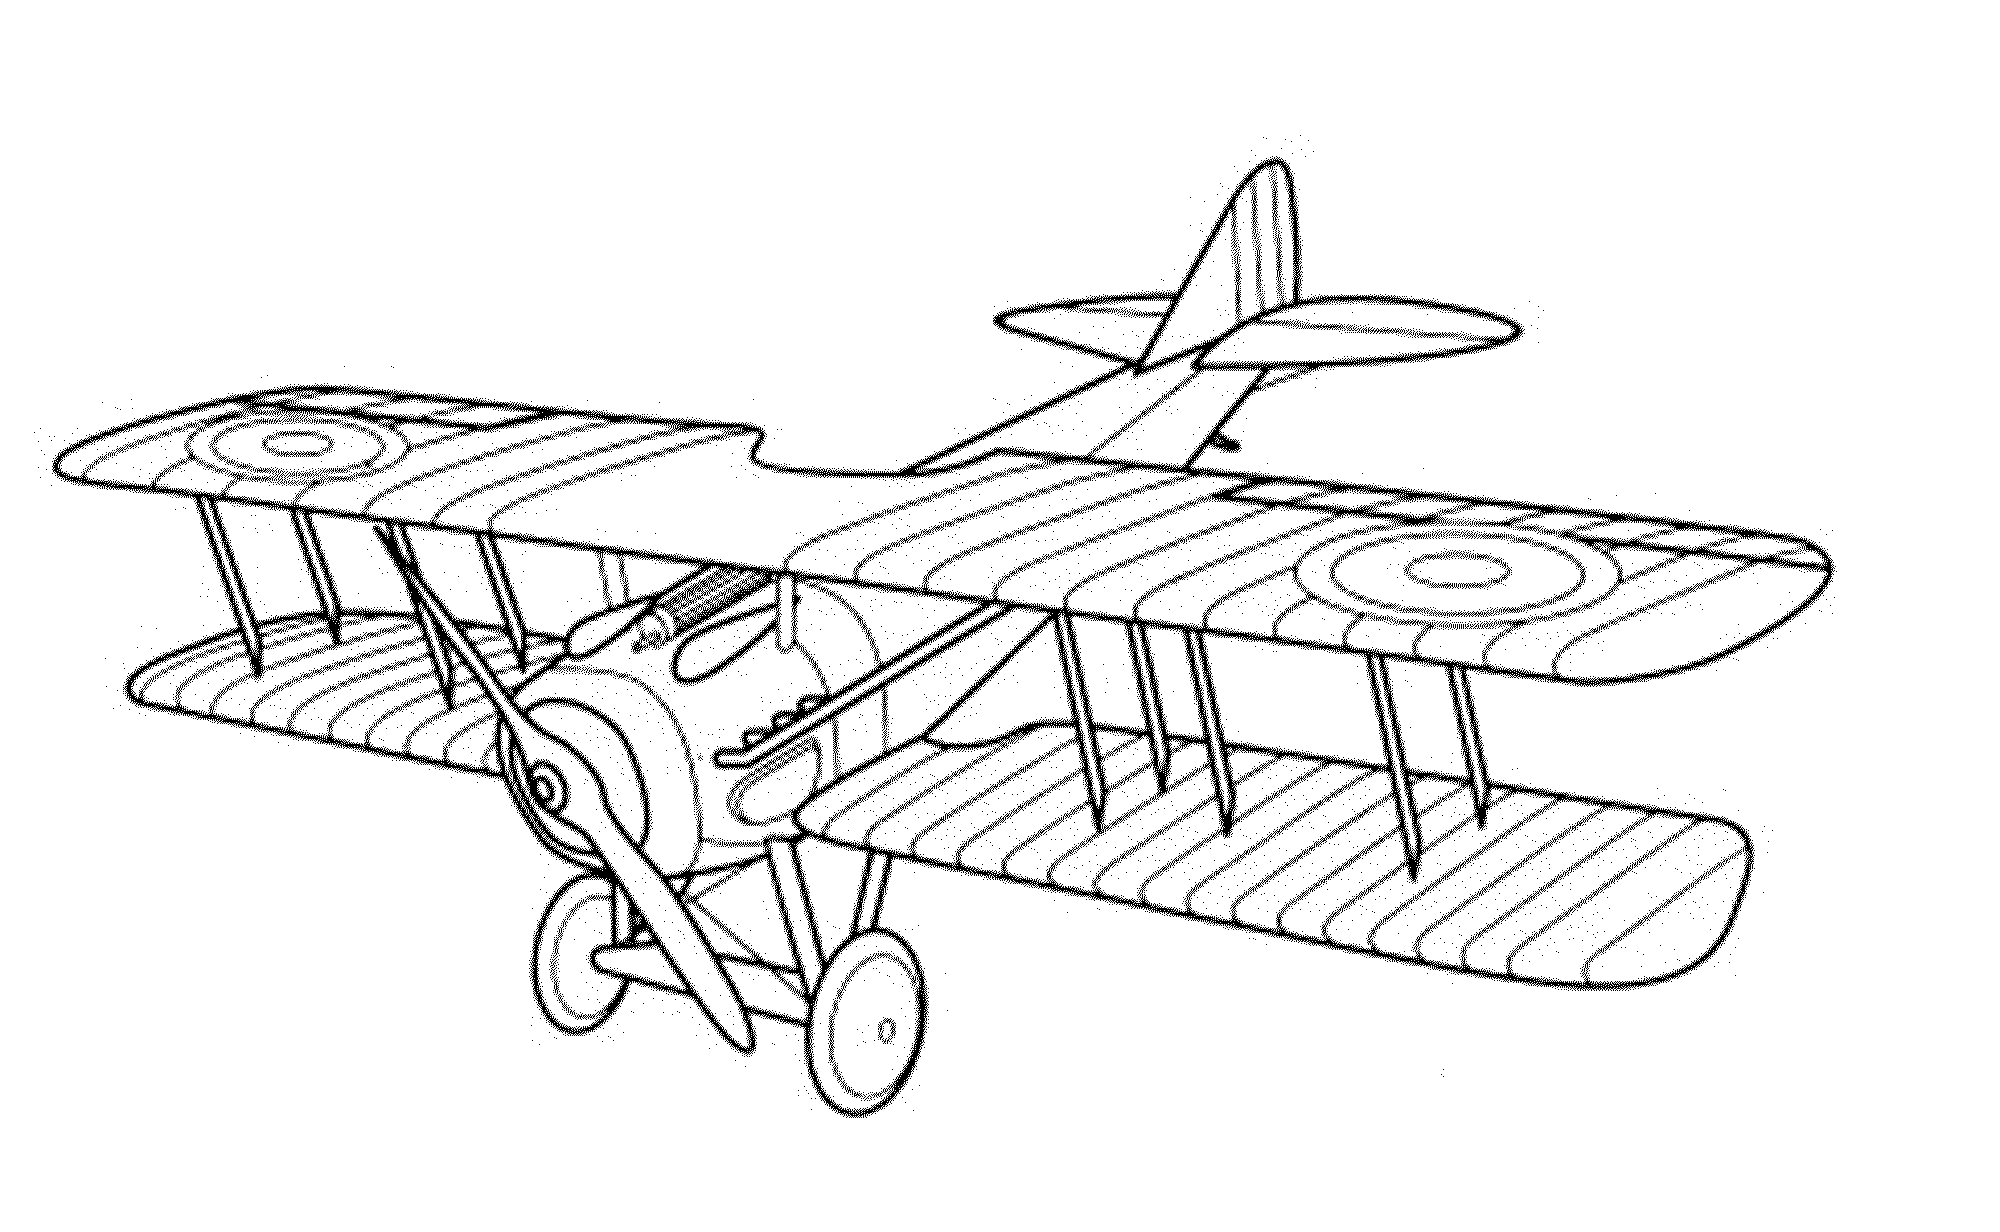 free vintage airplane coloring pages